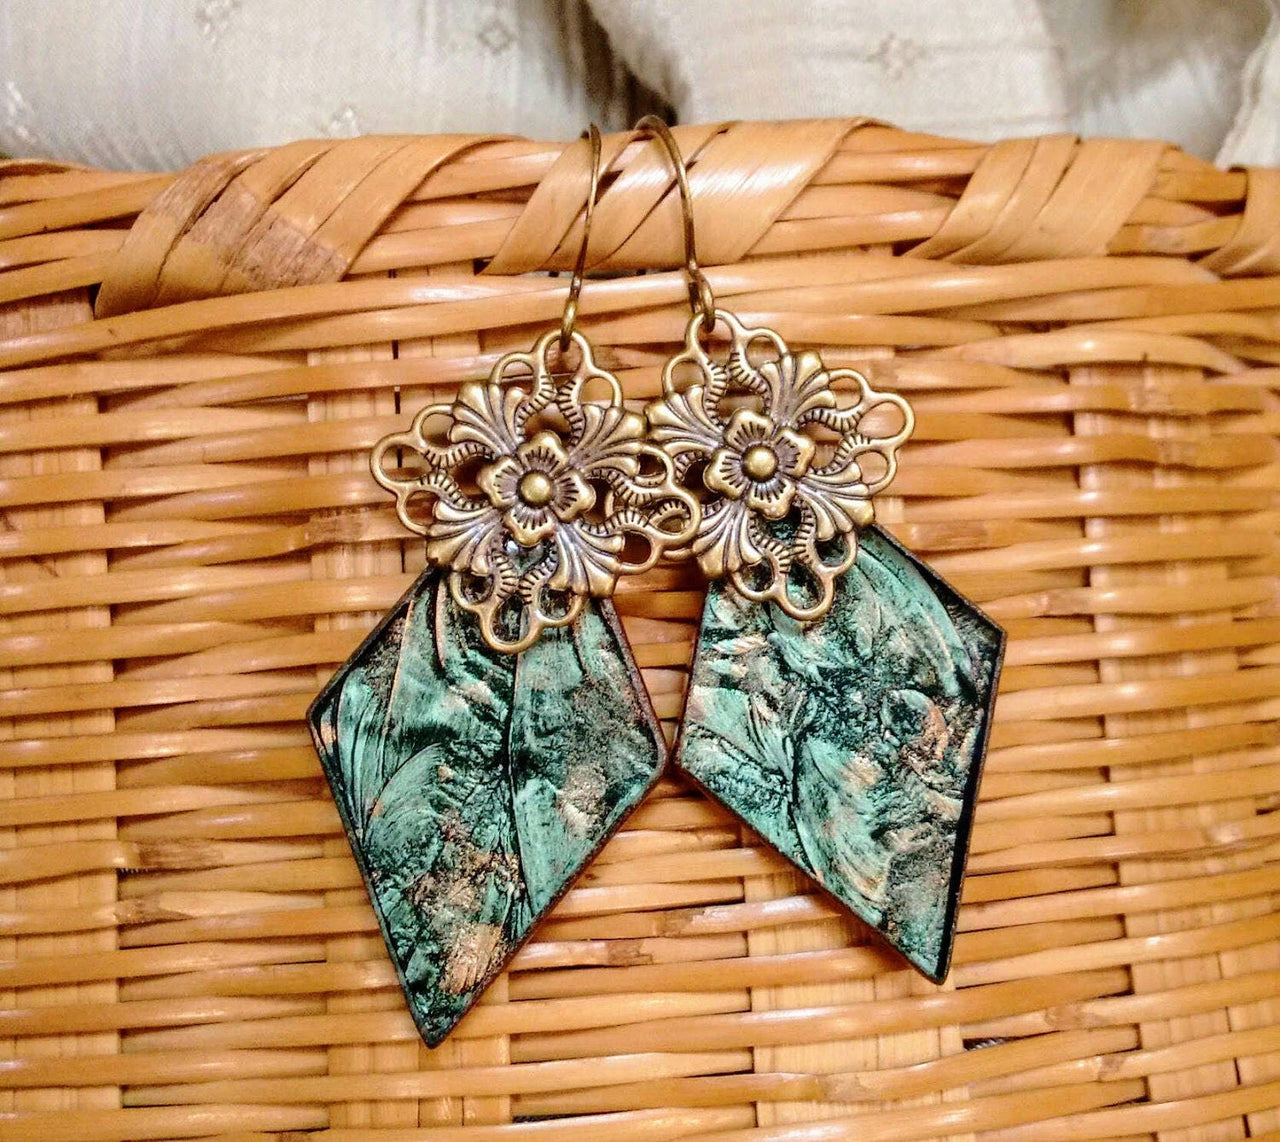 Green and bronze Van Gogh stained glass earrings